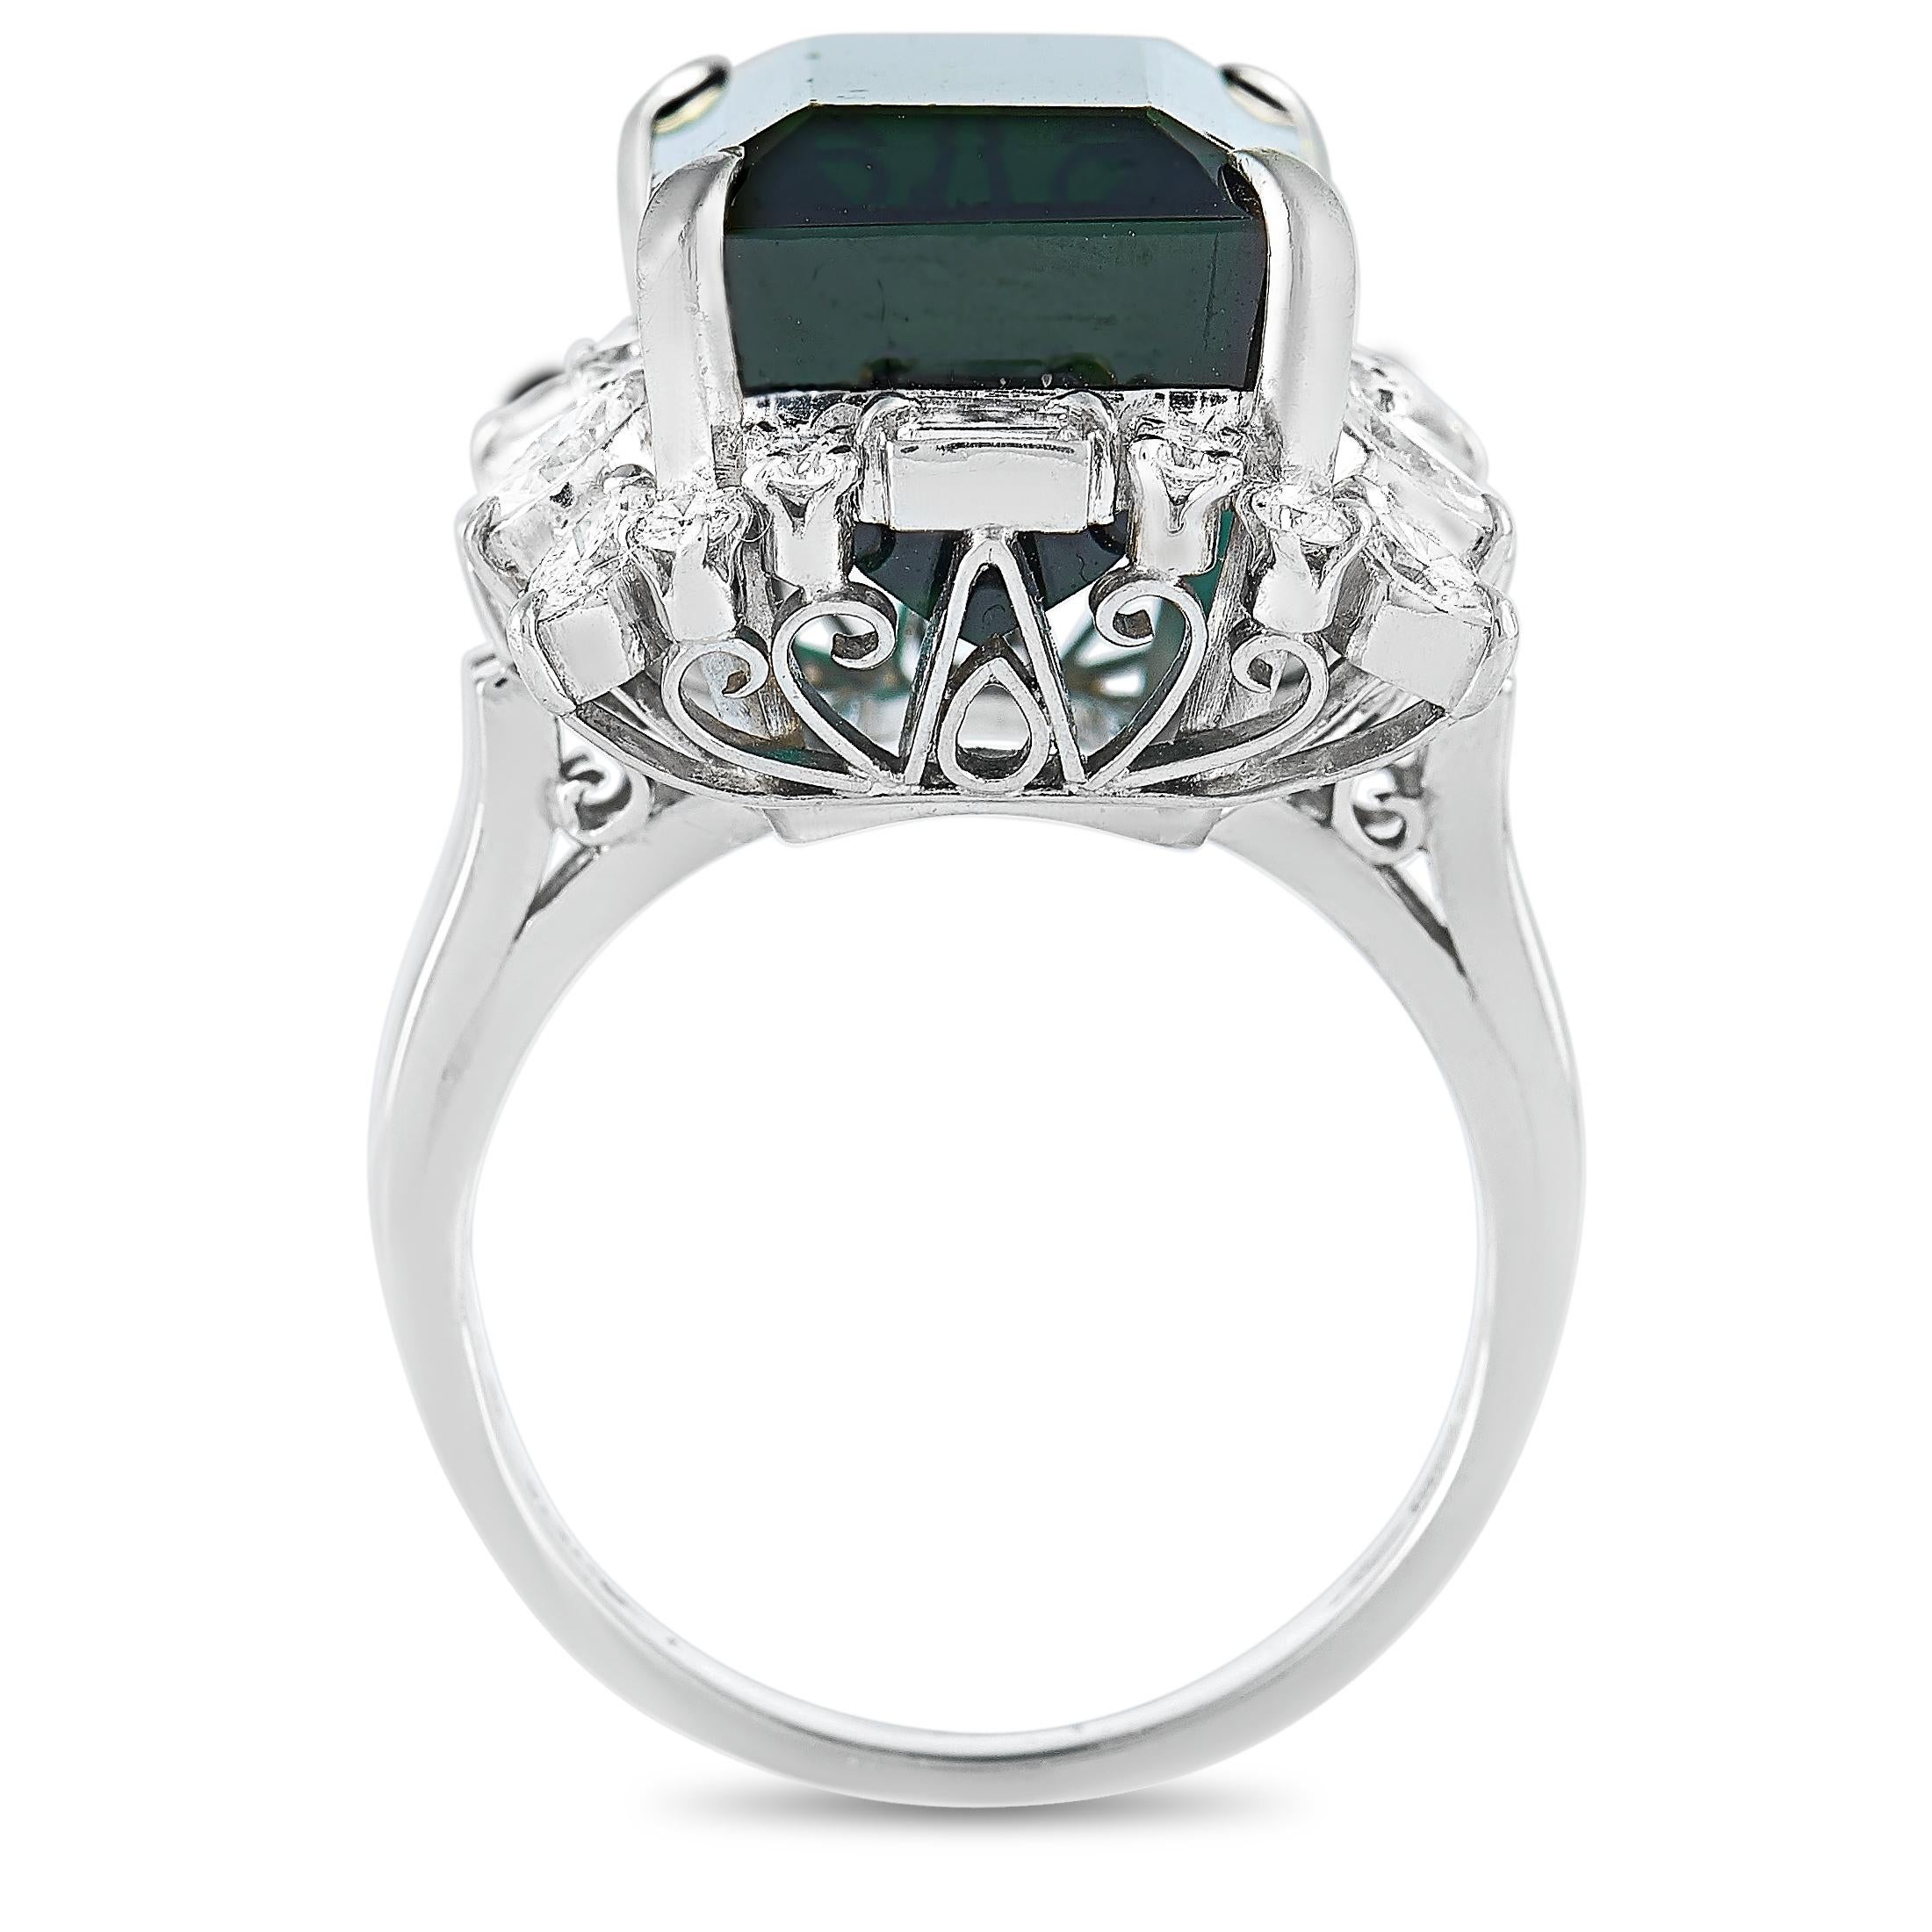 This LB Exclusive ring is crafted from platinum and weighs 15.3 grams. It boasts band thickness of 3 mm and top height of 17 mm, while top dimensions measure 18 by 19 mm. The ring is set with a 16.80 ct green tourmaline and a total of 1.05 carats of